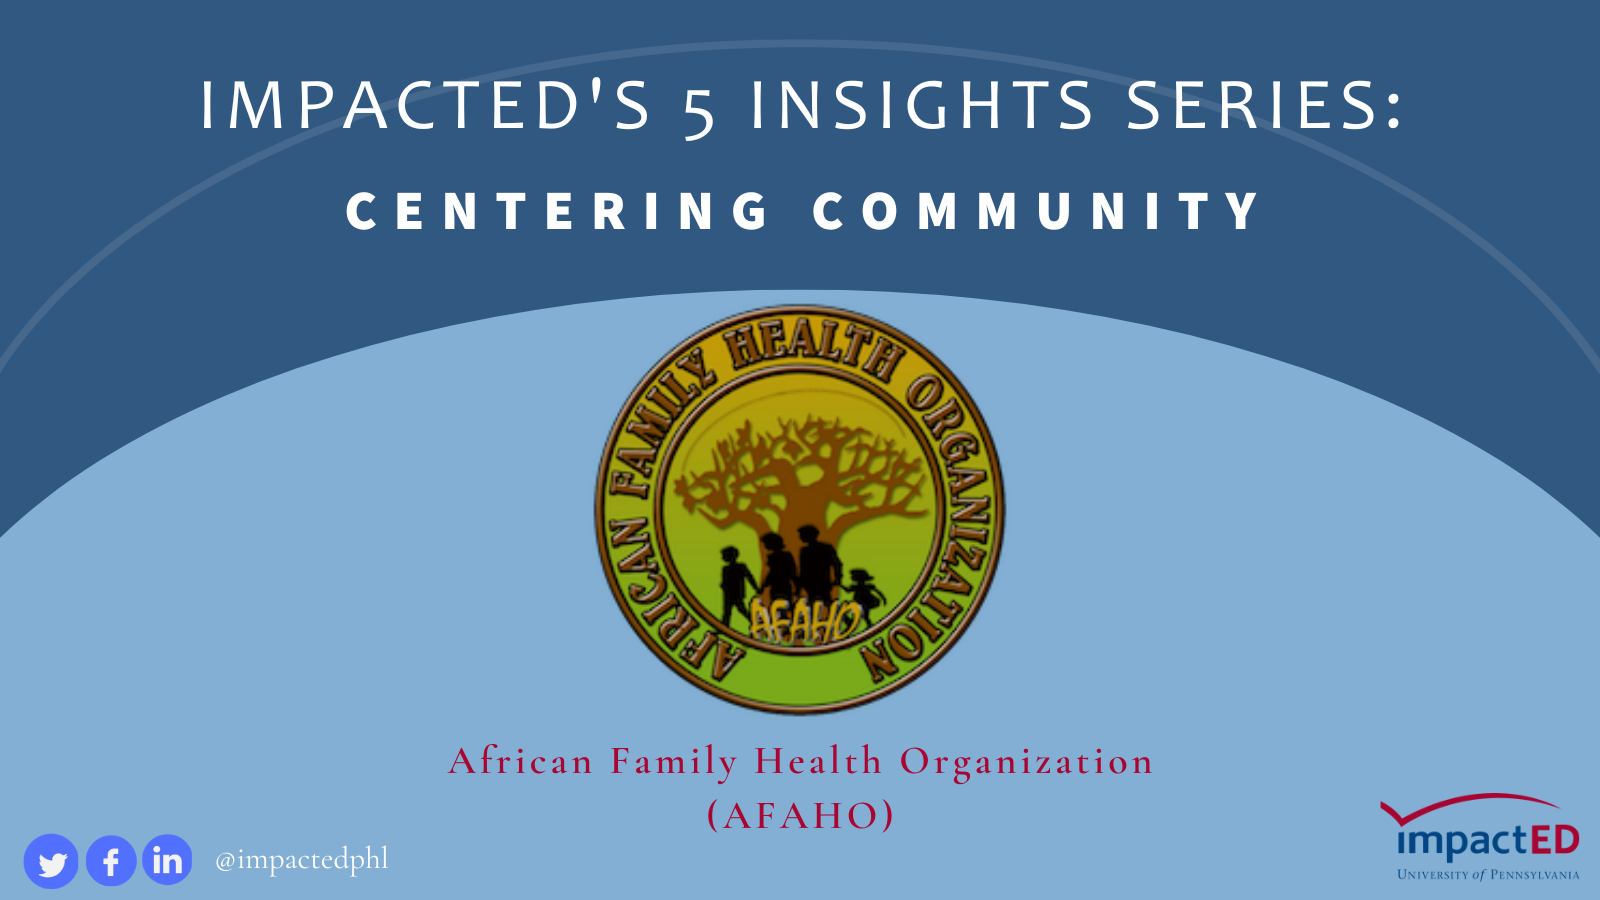 Centering Community with African Family Health Organizations